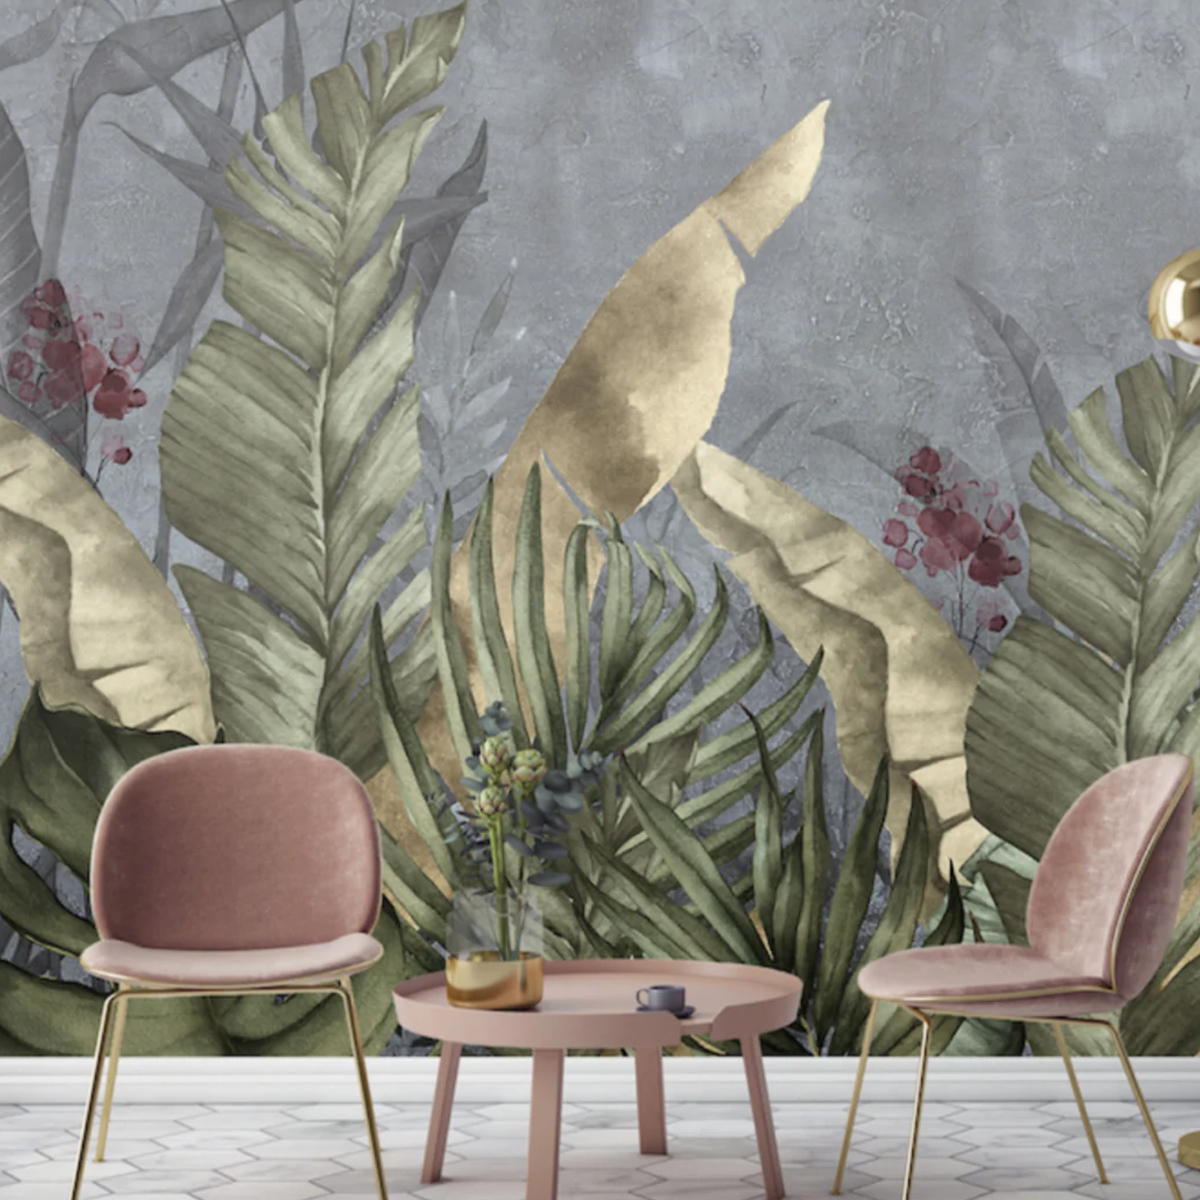 Airs of tropics and nature on your walls or walls. With our 'Tropical & Chinoserie' collection you will be able to achieve this with a variety of custom tailored designs.
#wallpaper #interiordesign